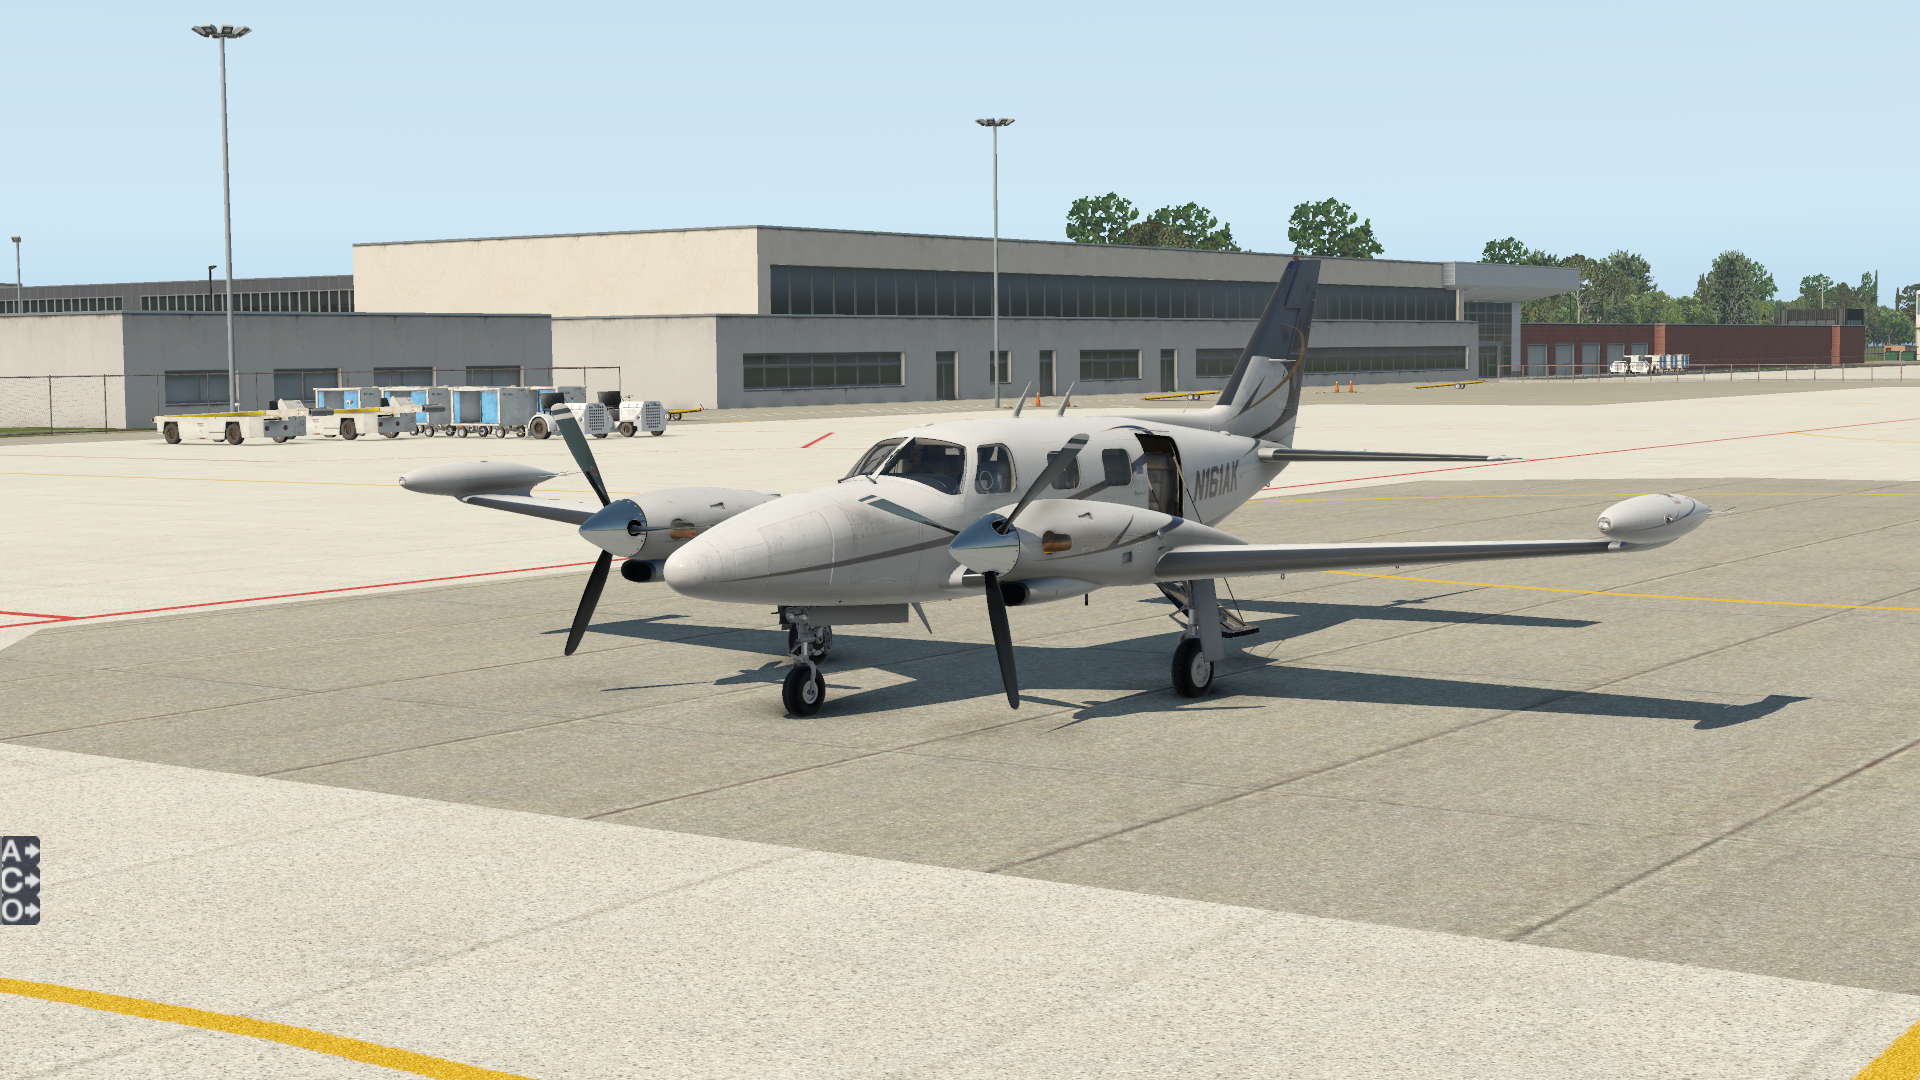 MEC-263 waiting for fuel at WABB after arriving from AYKV.